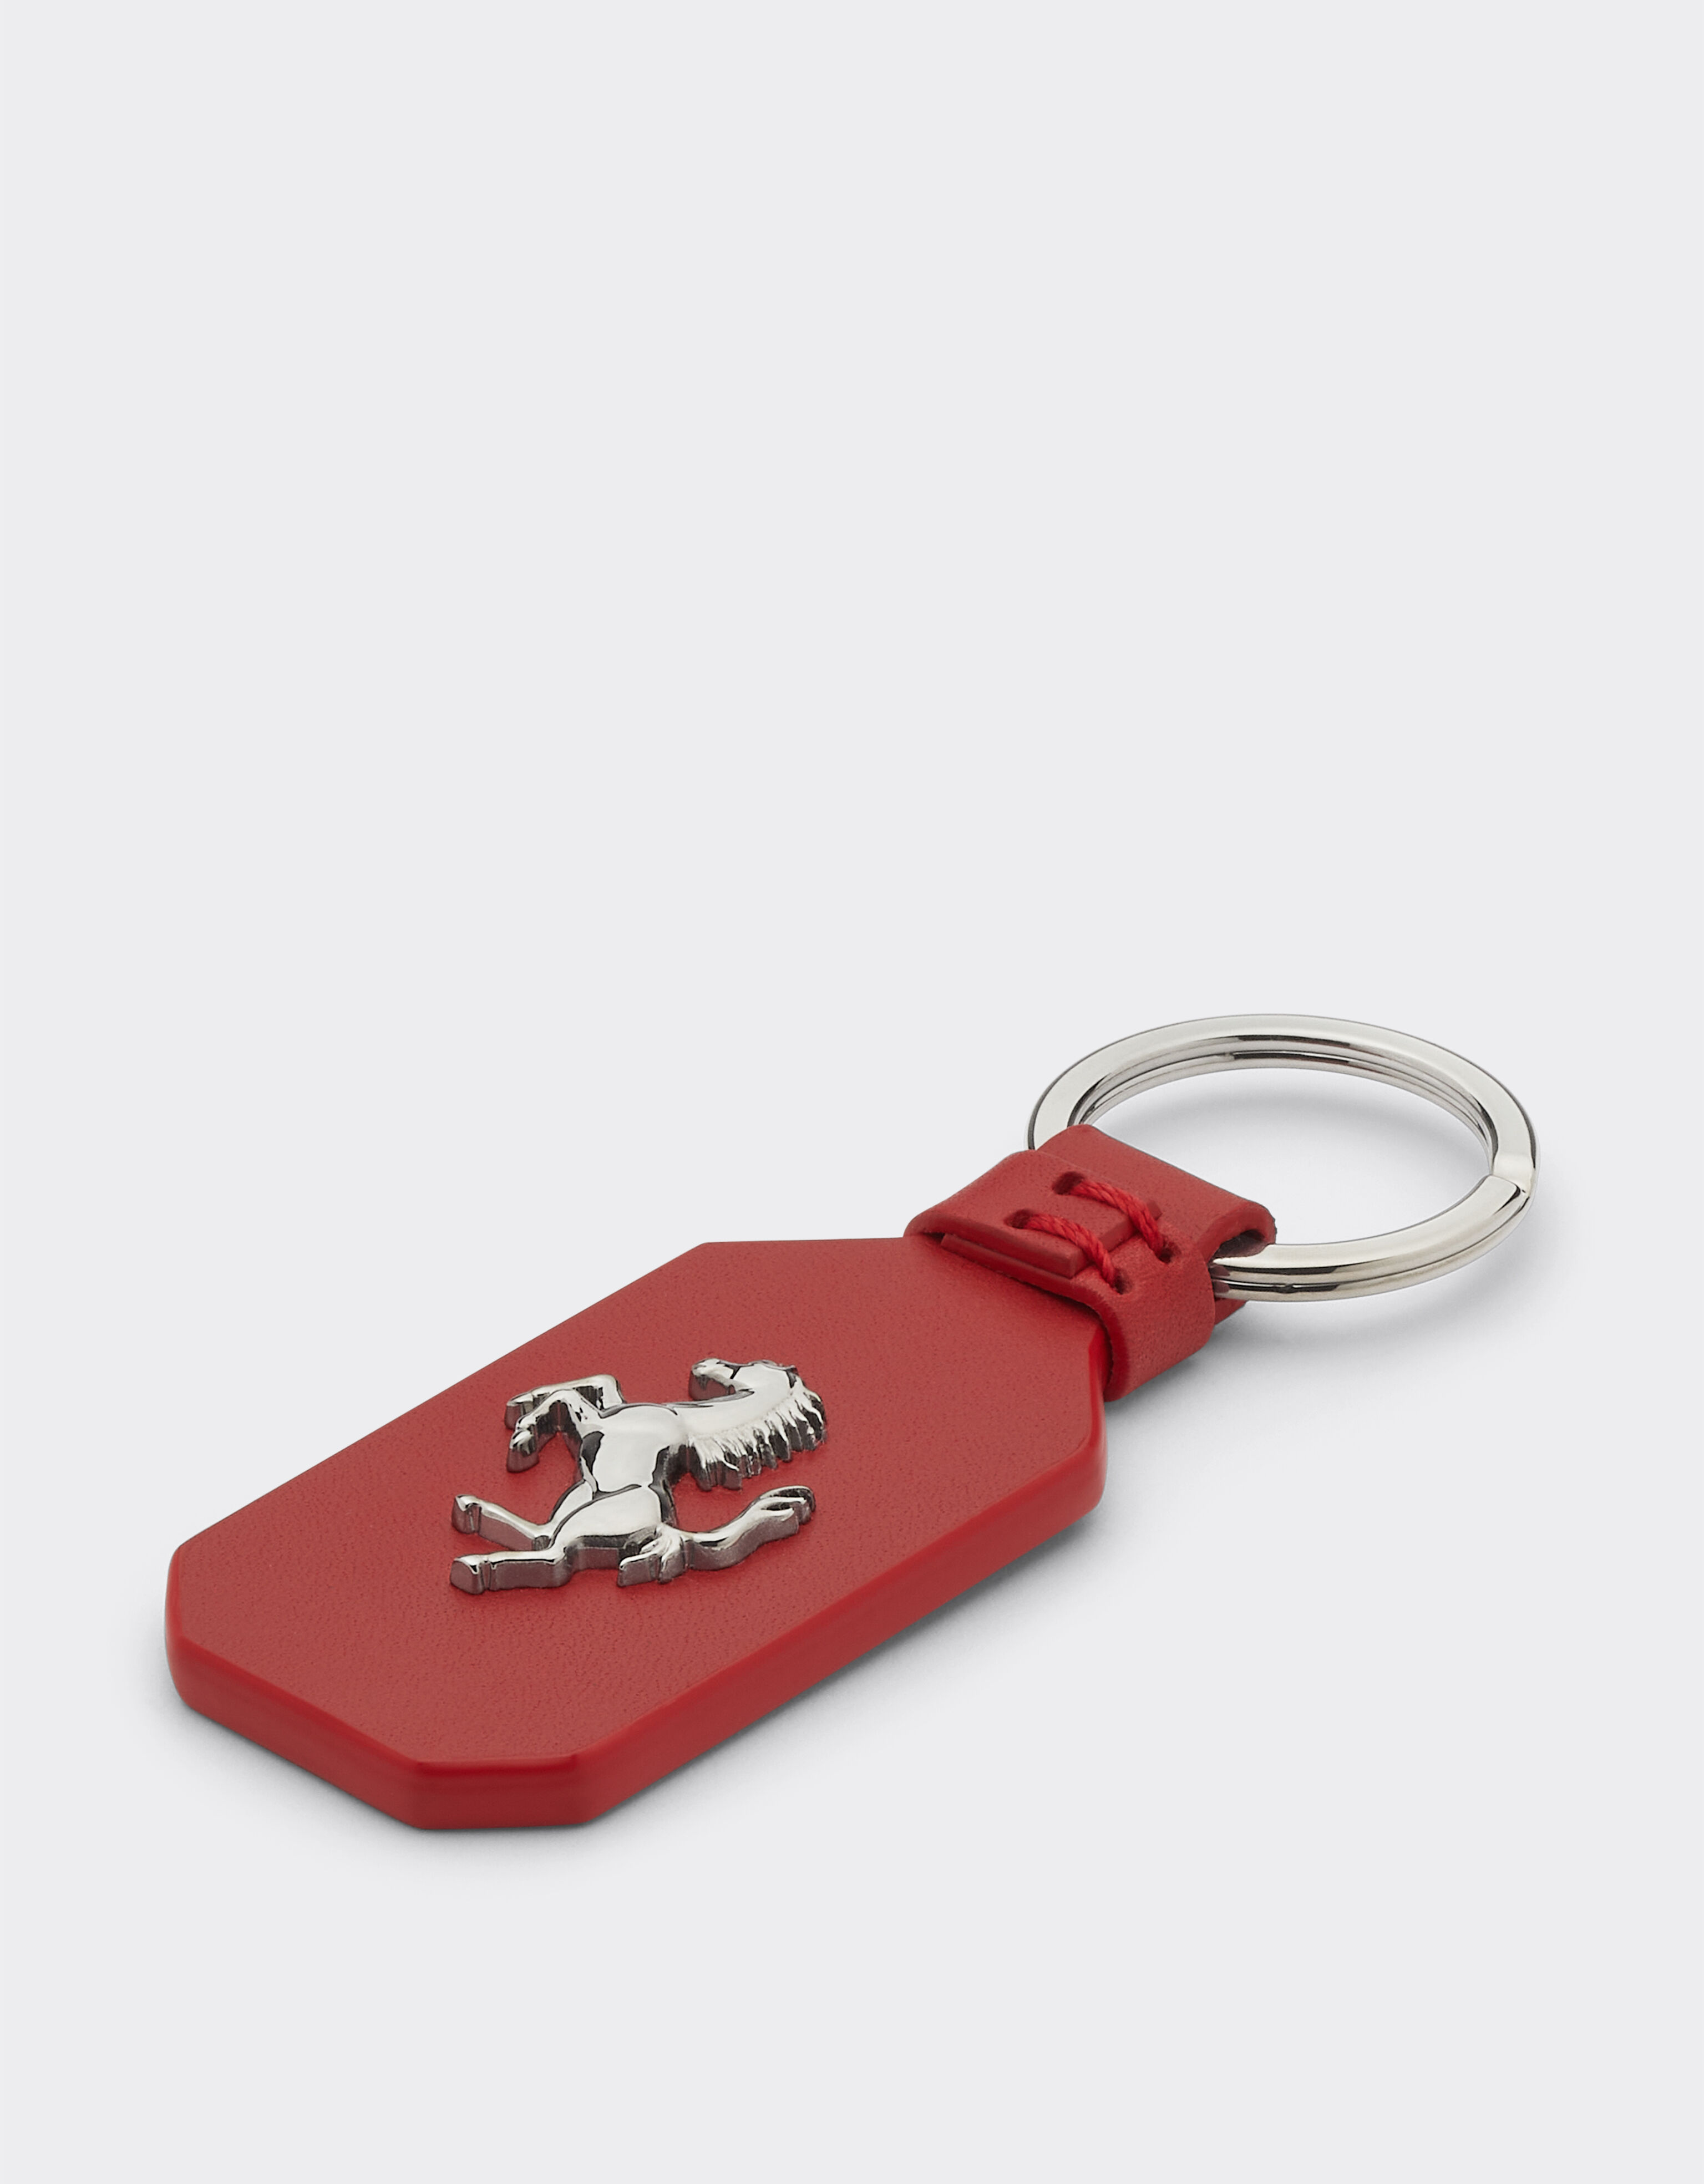 Ferrari Leather keyring with Prancing Horse Rosso Corsa 47156f